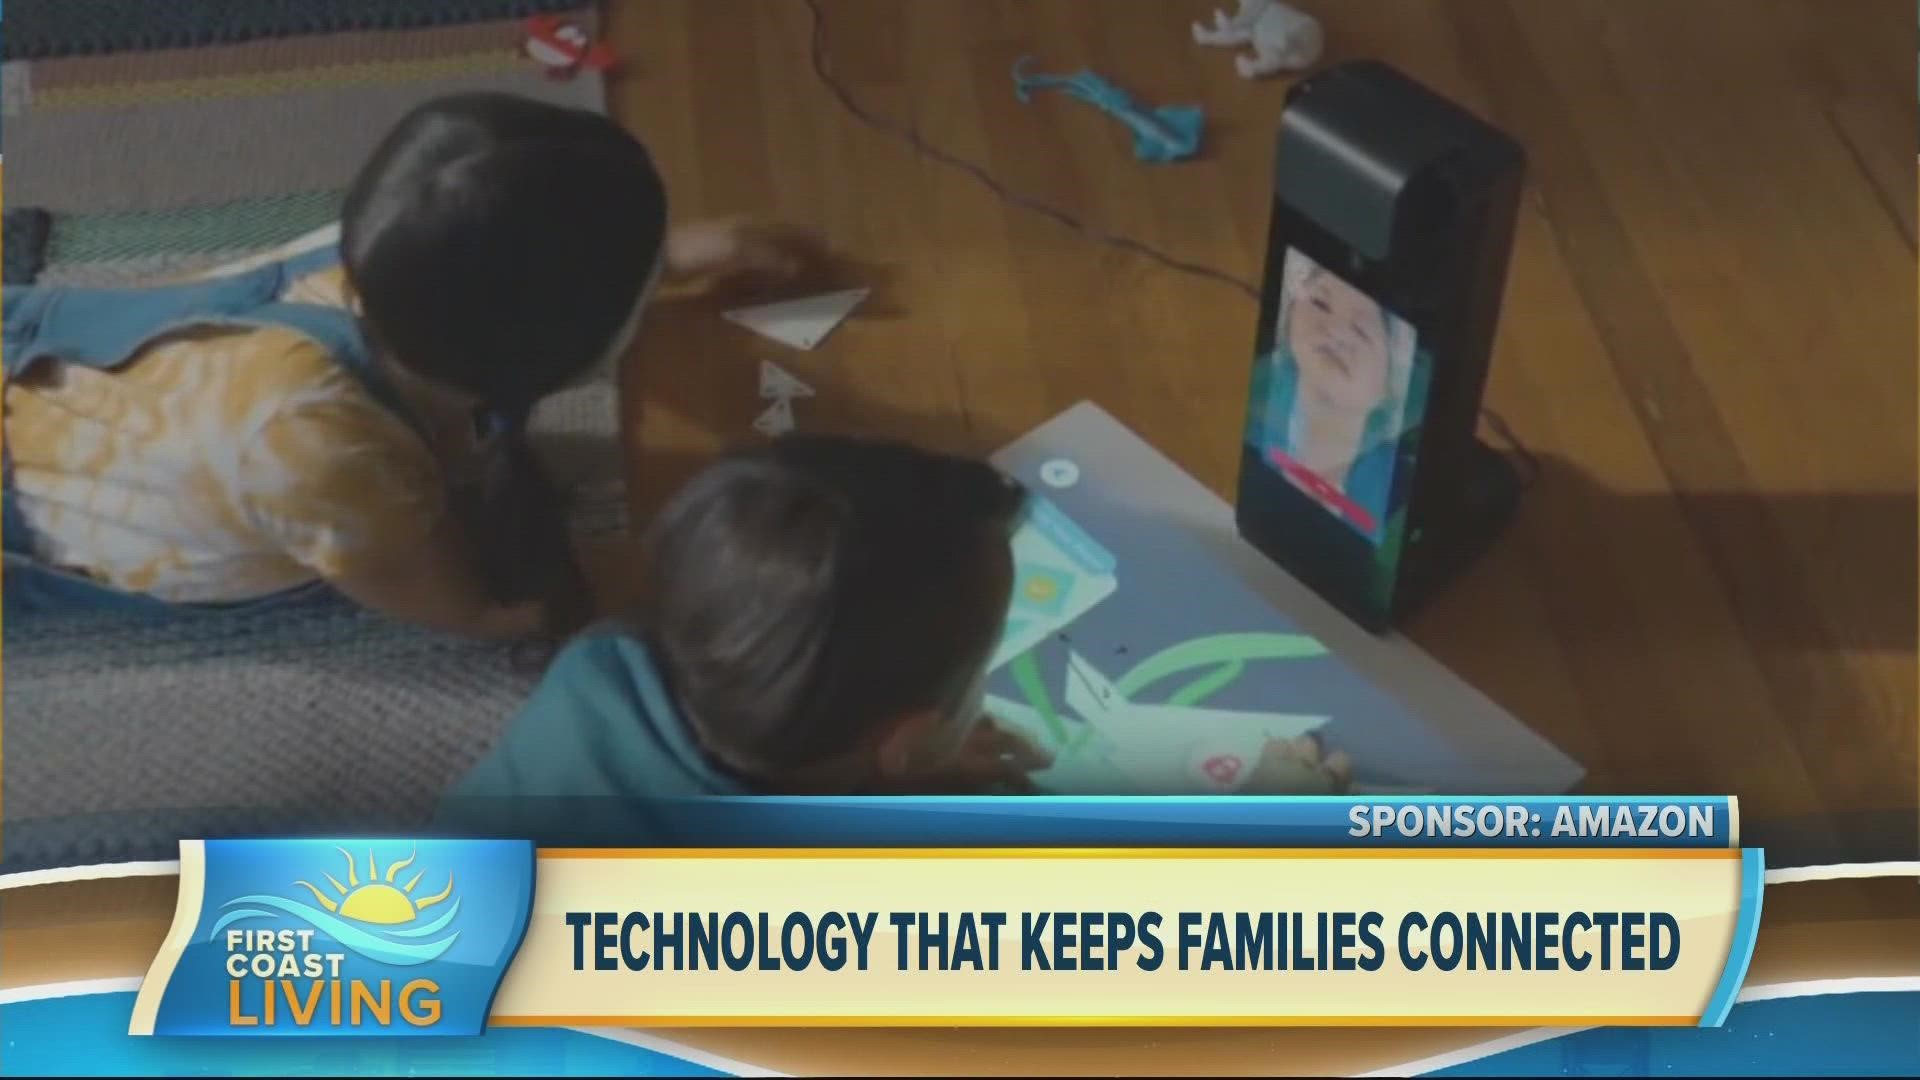 Bethany Braun-Silva of Amazon Glow is a new device designed to make it easy and fun for kids to spend time with remote family creating life-long memories.